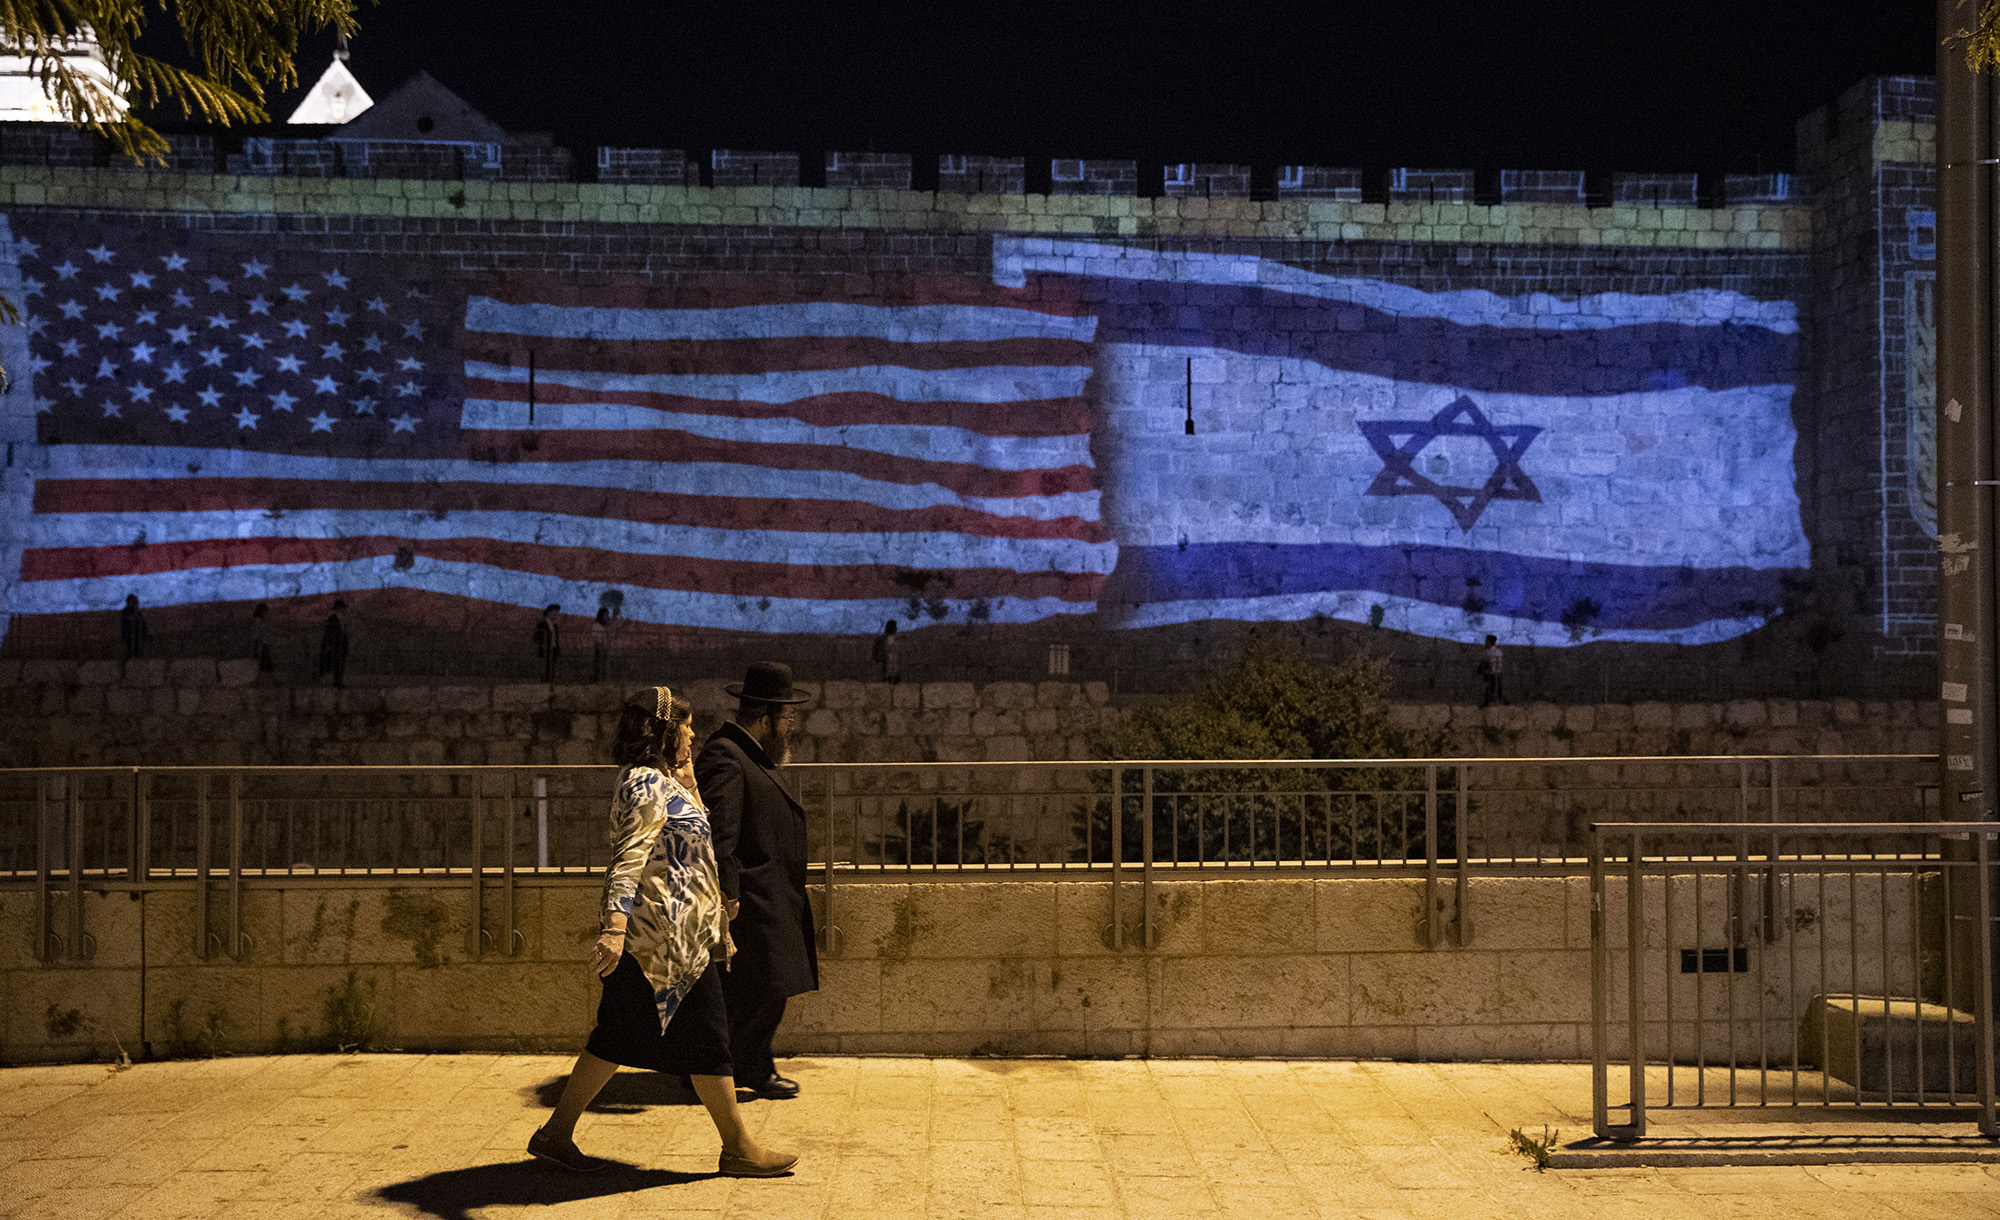 
U.S and Israeli flags are projected onto the historical walls near Hebron Gate in Jerusalem during U.S President Joe Biden&#8217;s visit on July 14, 2022. Mostafa Alkharouf/Anadolu Agency via Getty Images.






